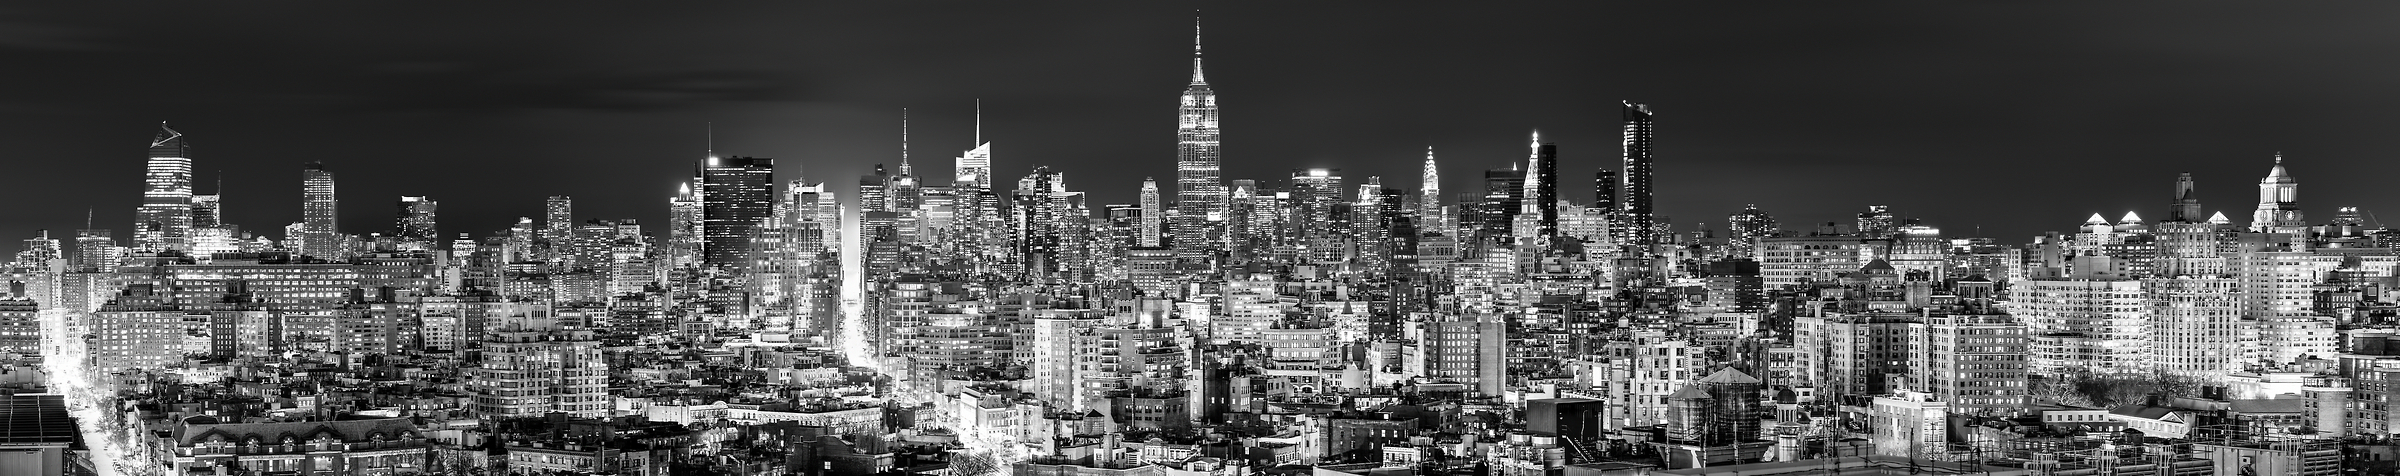 2,832 megapixels! A very high resolution, large-format VAST photo print of the Manhattan, New York City skyline at night; cityscape photo created by Dan Piech.